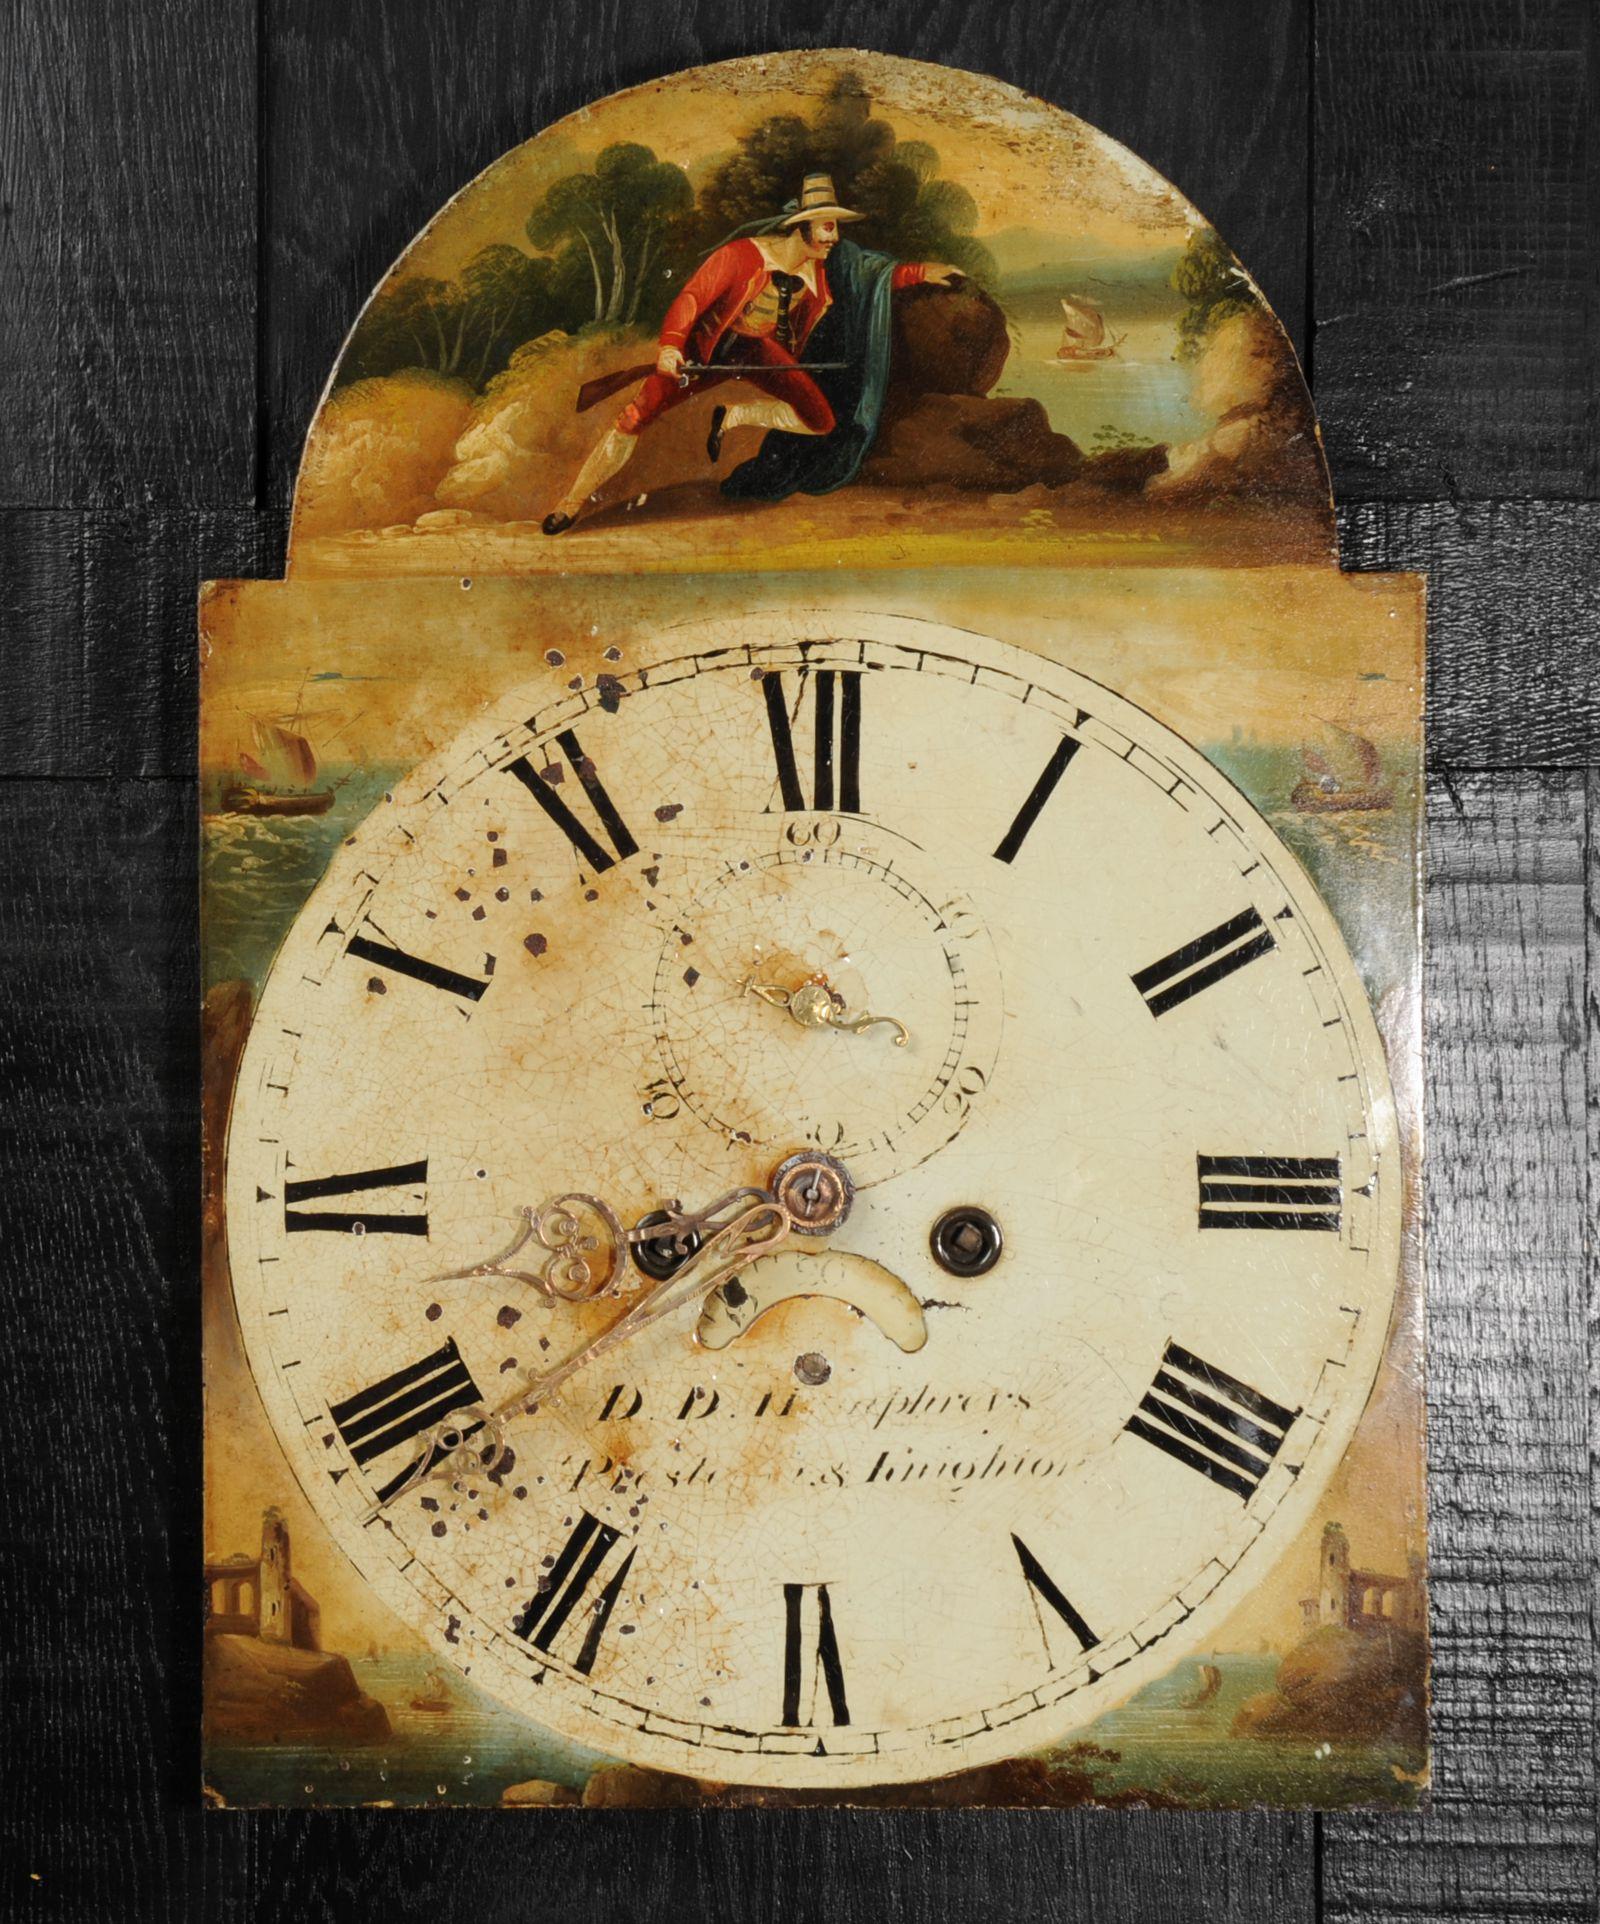 A lovely antique iron clock dial dating from 1850 featuring the legendary smuggler and brigand Will Watch. Beautifully painted in the vibrant colours of the theater, he was portrayed in Victorian melodramas and also in a ballad. 

The painting of